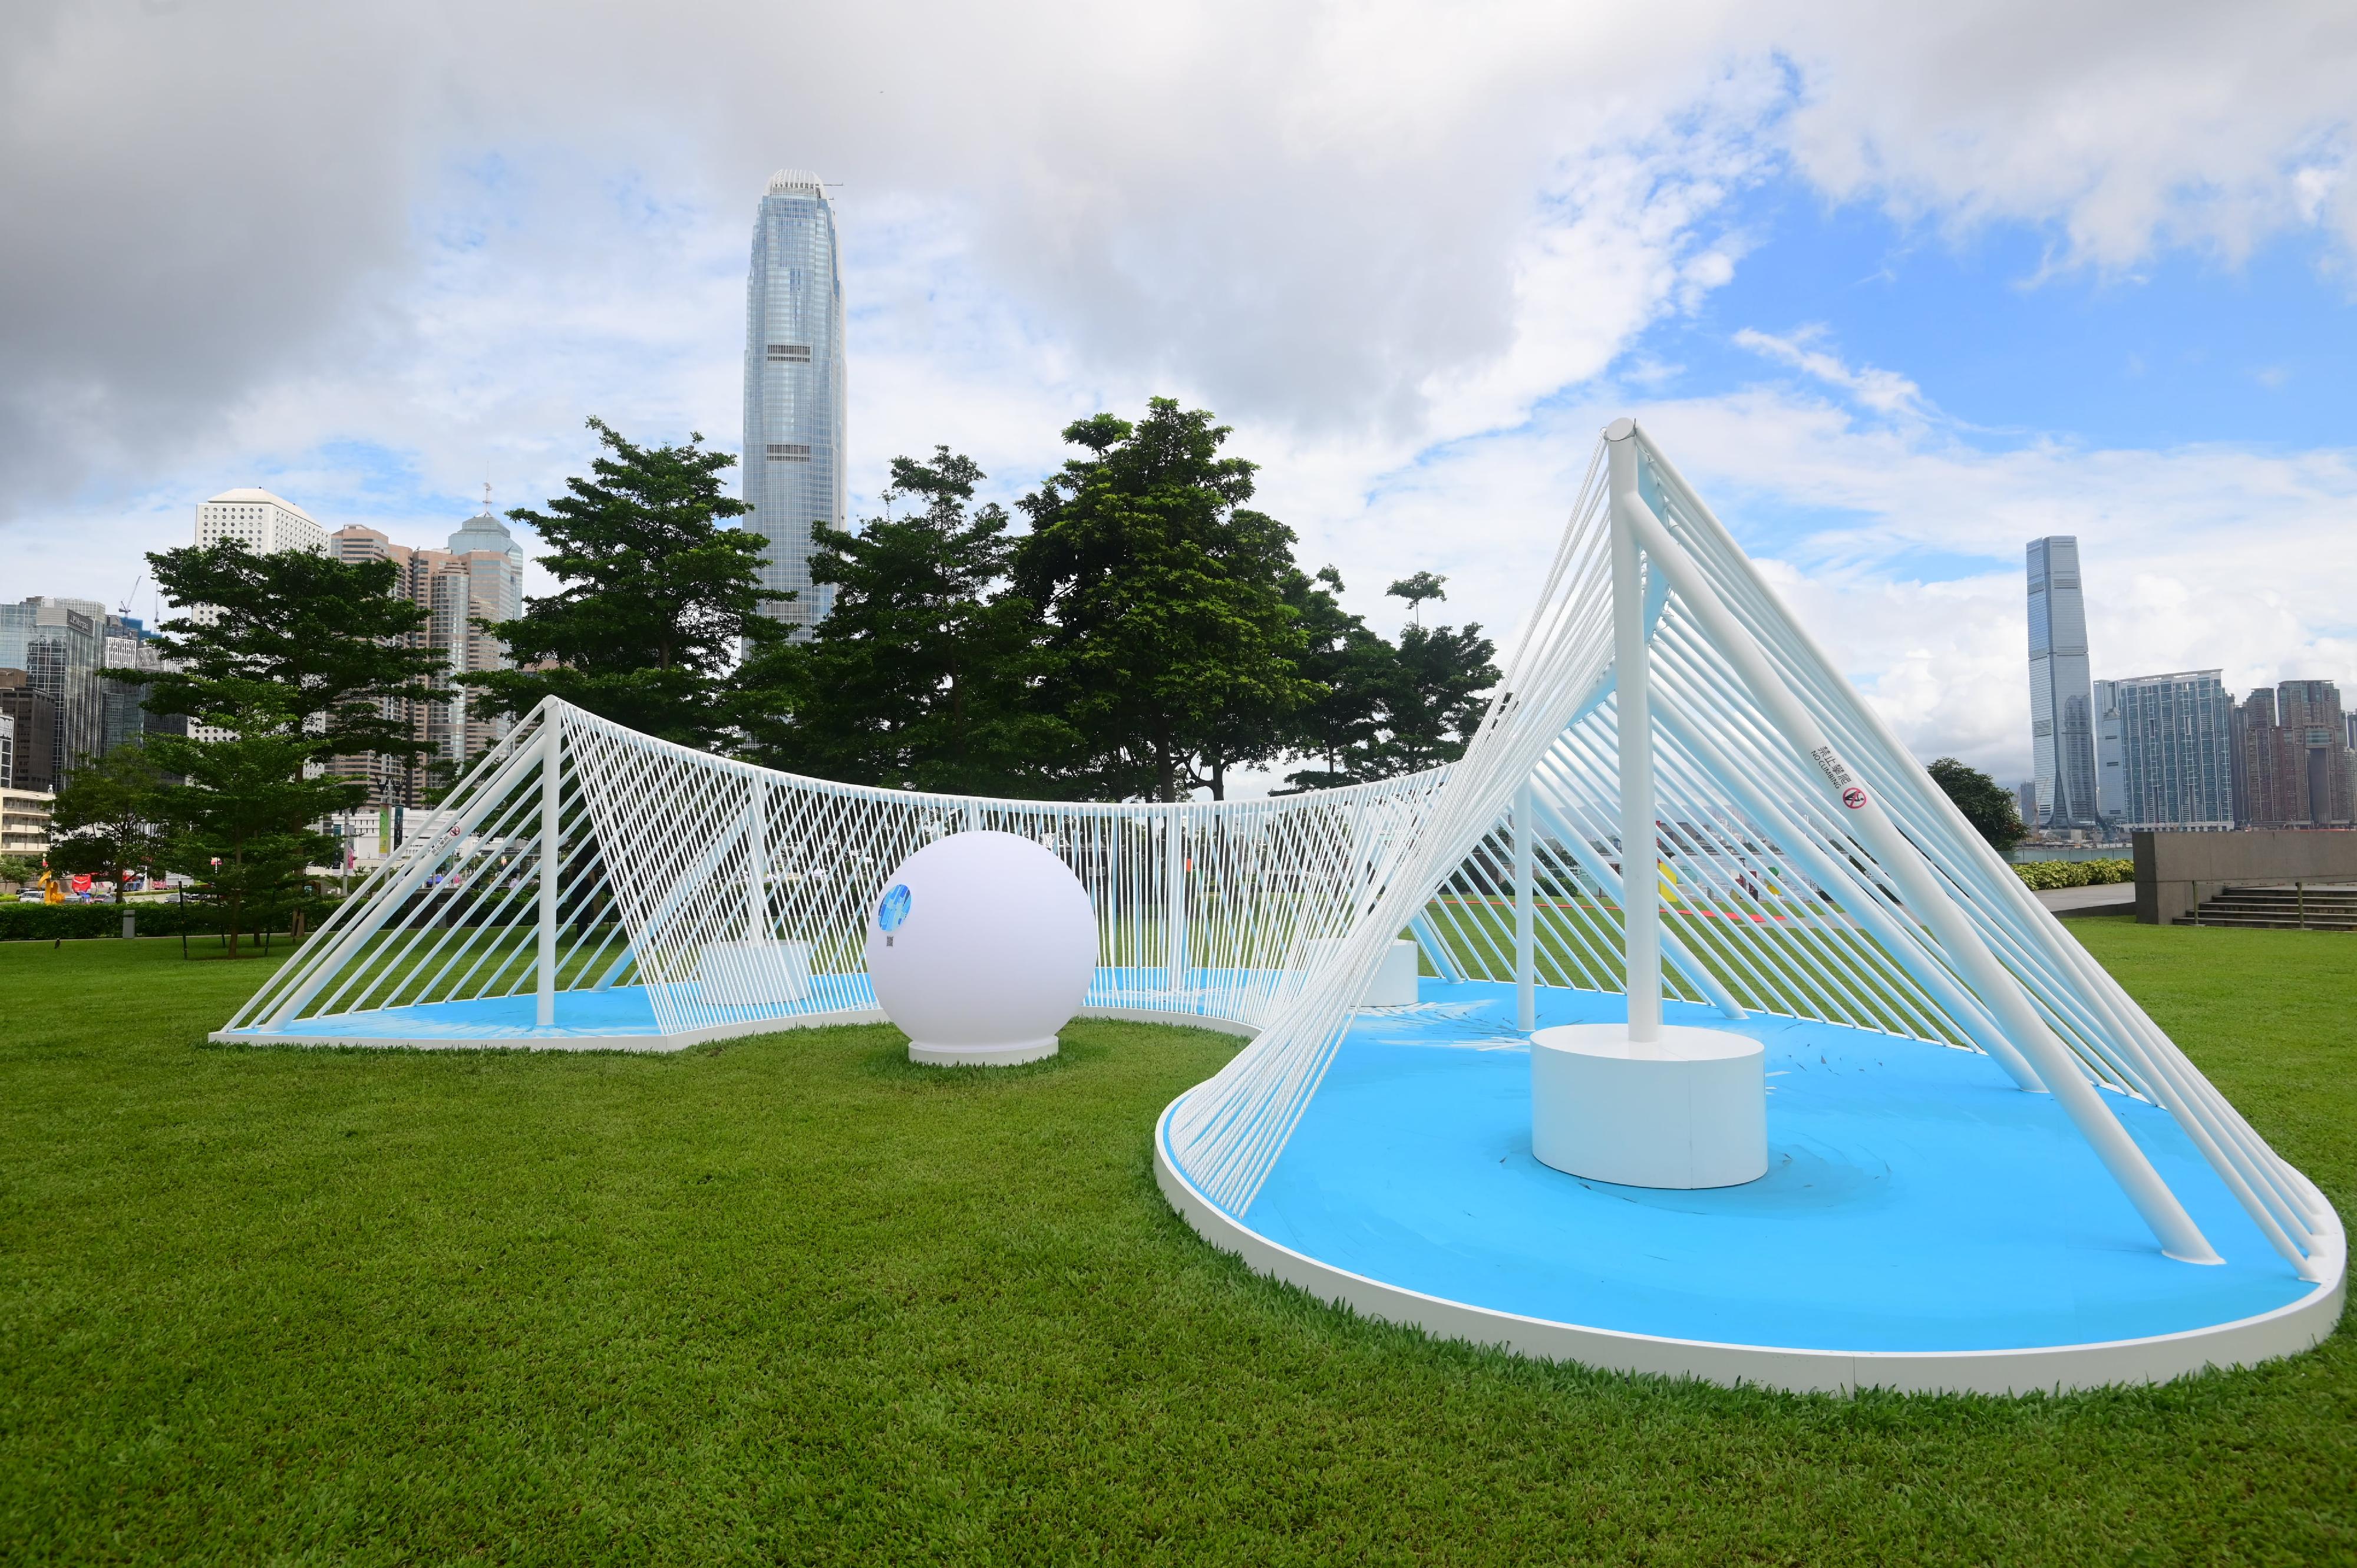 The opening ceremony of the exhibition "Art@Harbour" was held at the Central and Western District Promenade (Central Section) today (June 22). Picture shows one of the artworks, "The Interplay", under "The Hong Kong Jockey Club Series: Science in Art".